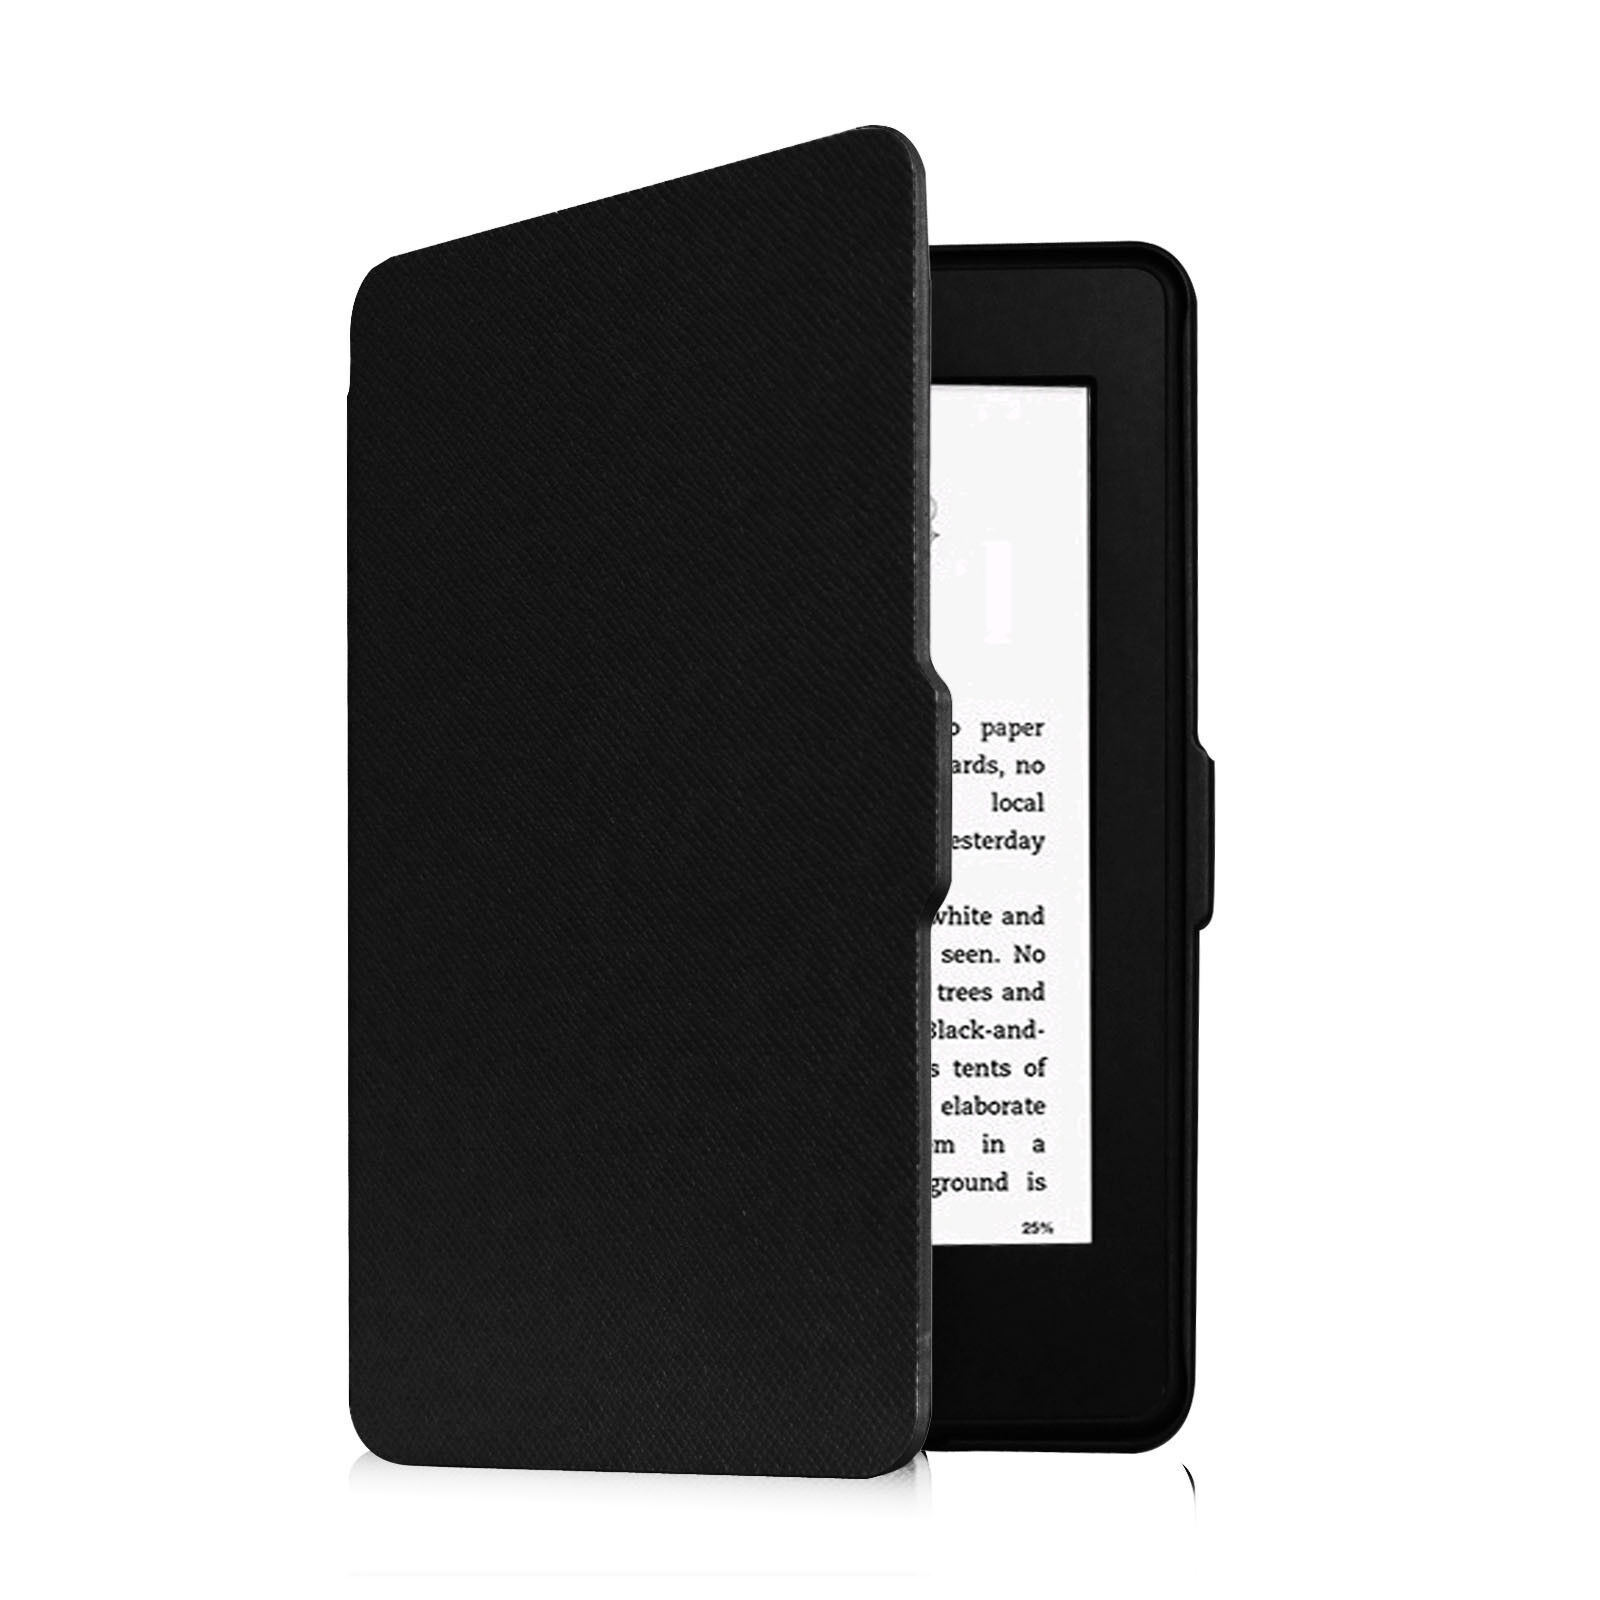 For All Amazon Kindle Paperwhite 6'' 2012 2013 2015 2016 Case Cover Sleep/Wake